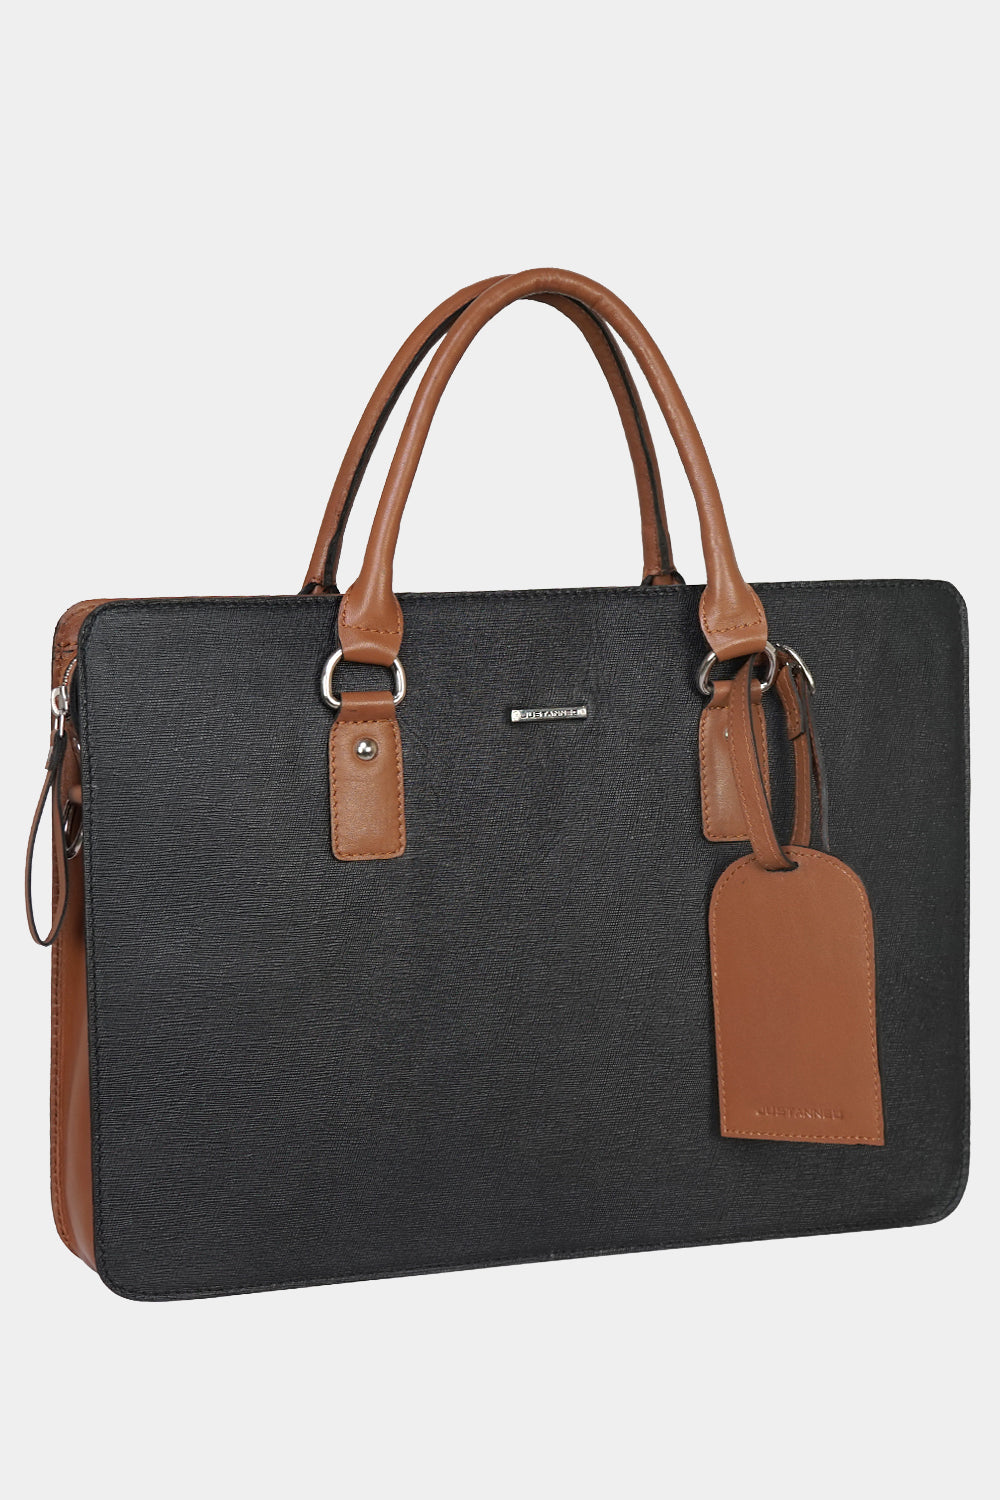 Justanned Saffiano Laptop Bag